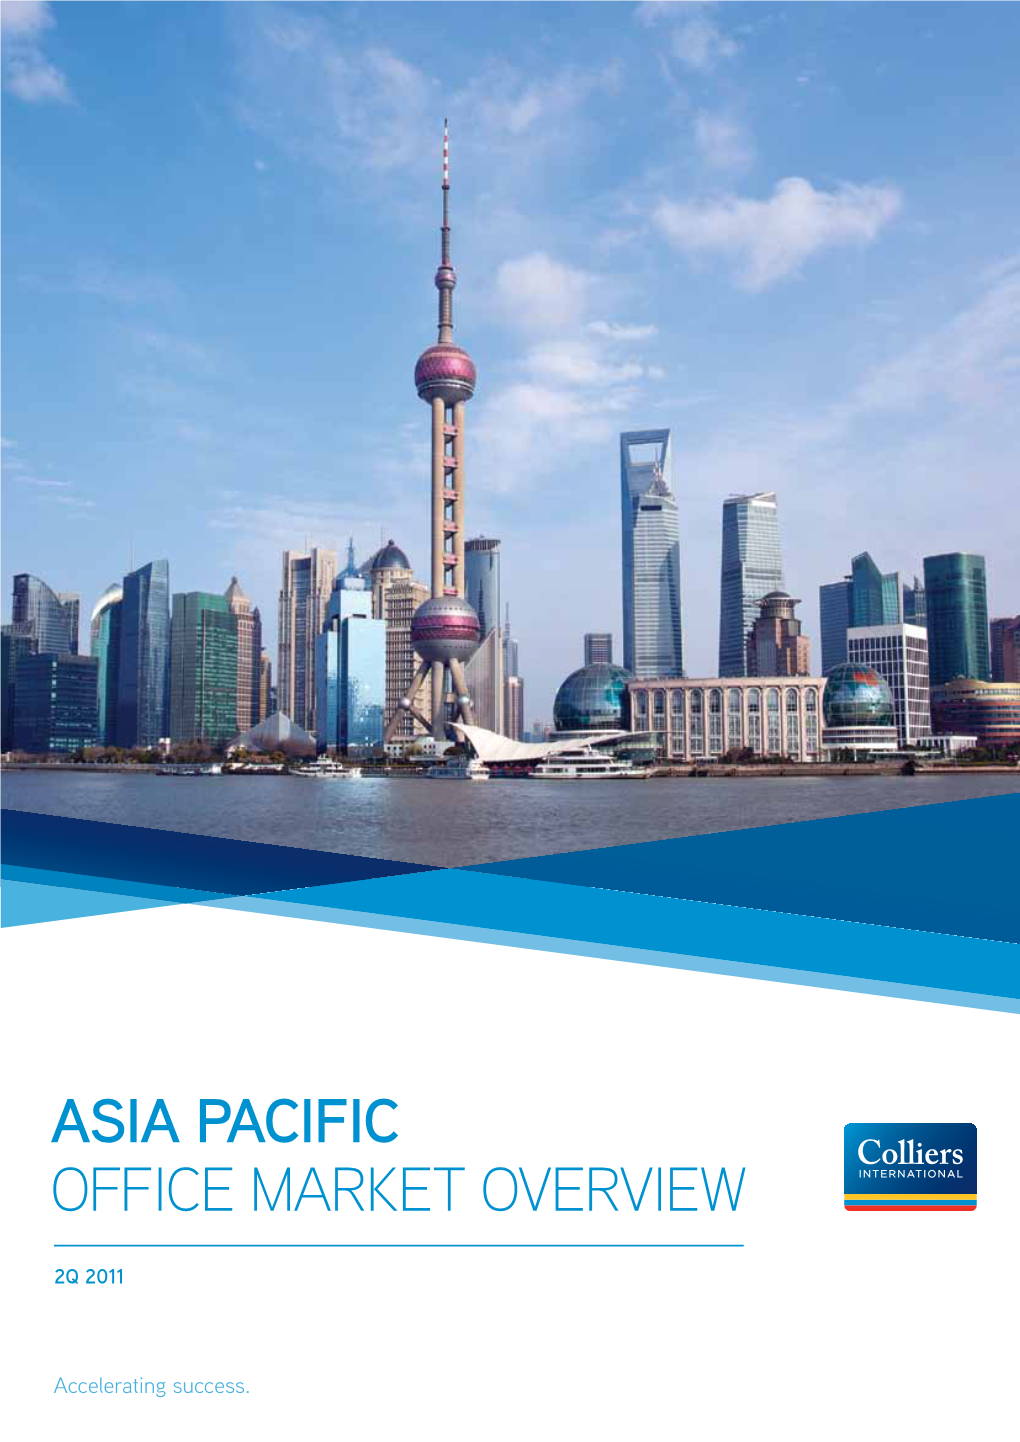 Asia Pacific Office Market Overview